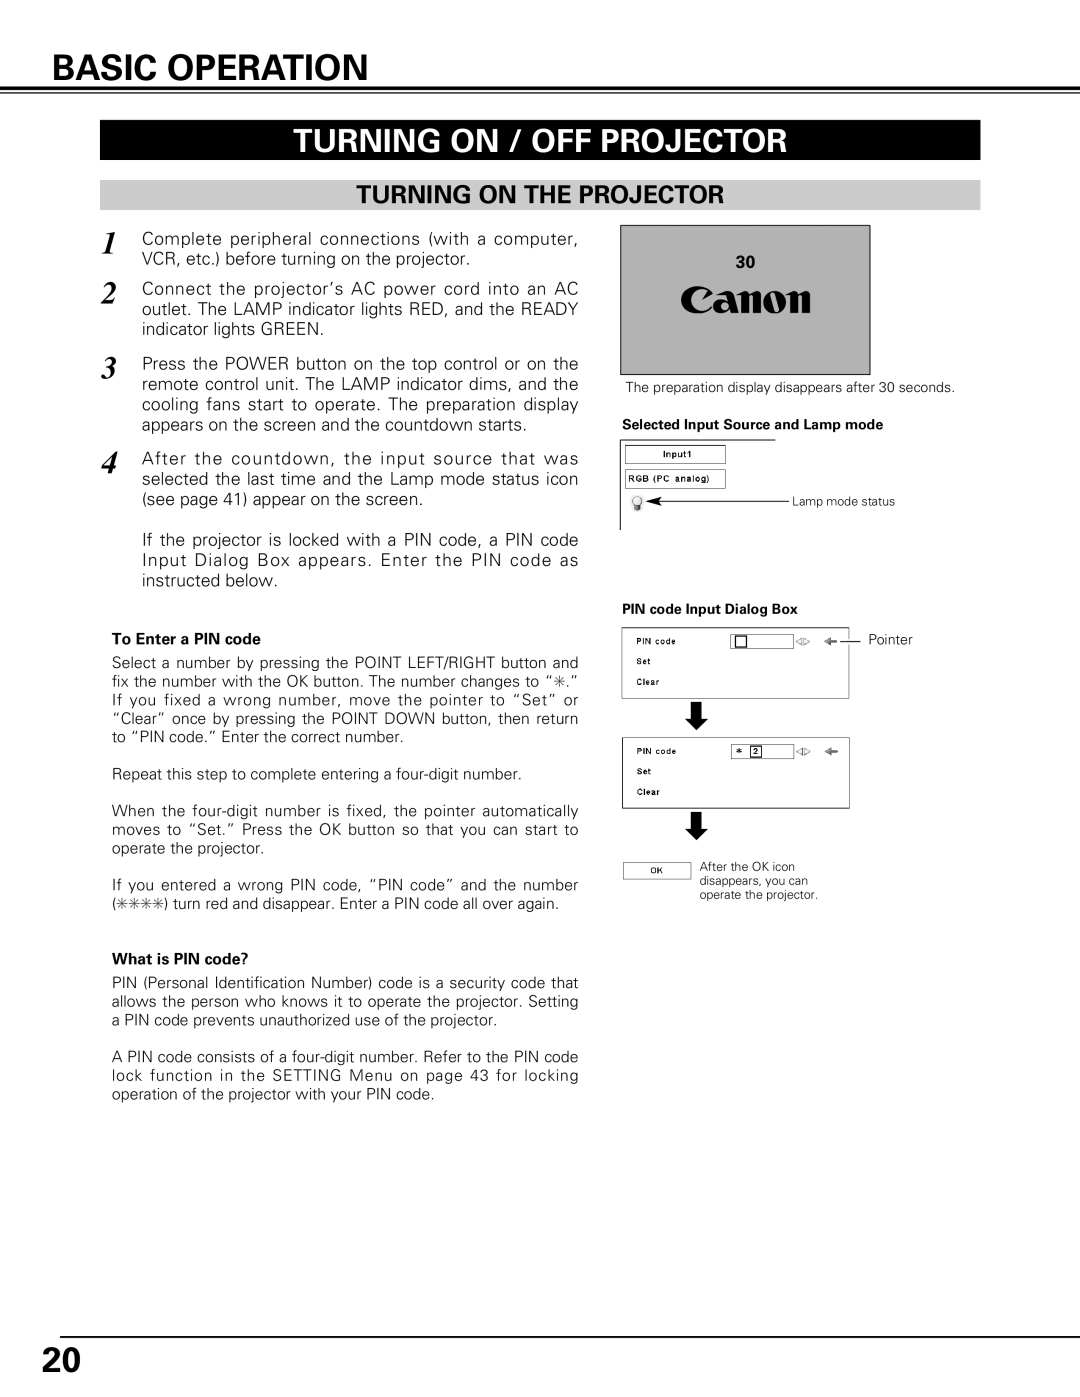 Canon LV-7575 user manual Basic Operation, Turning On / Off Projector, Turning On The Projector 